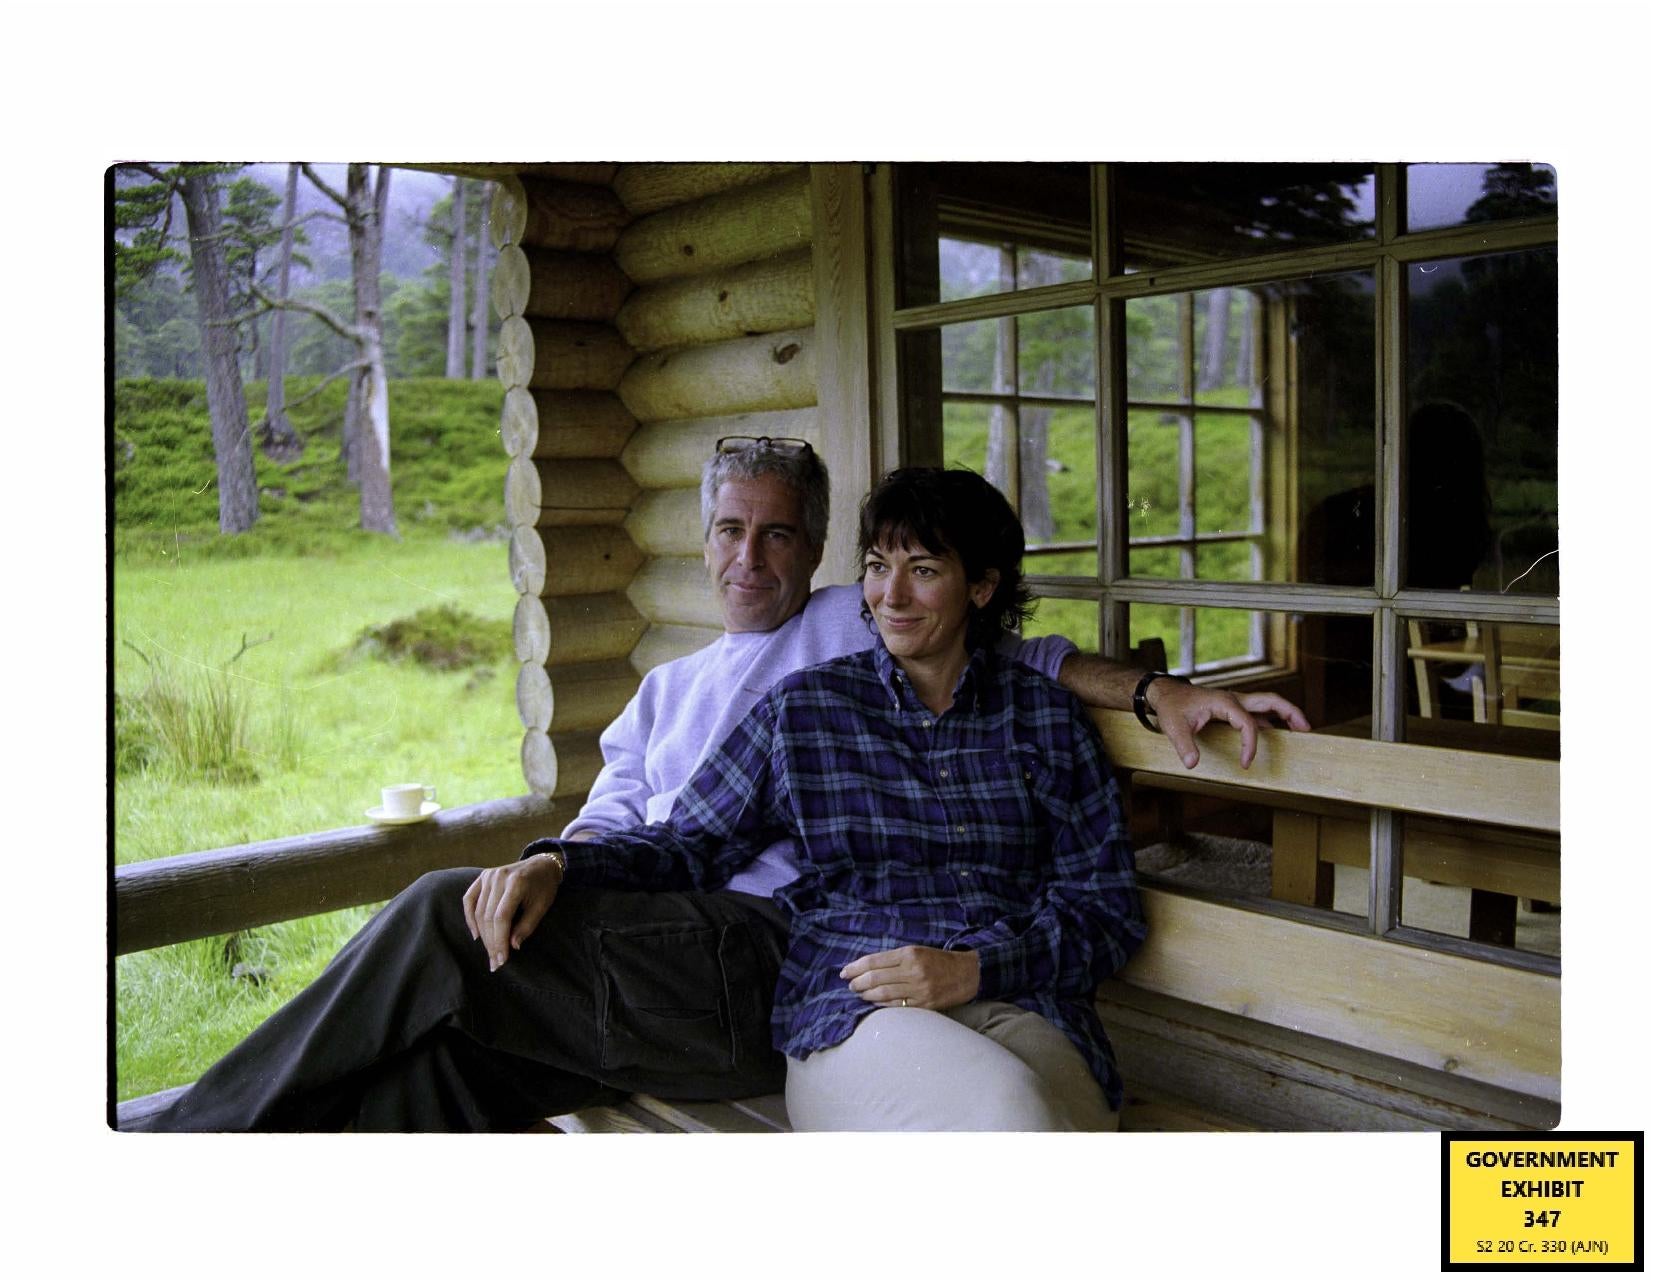 Ghislaine Maxwell with Jeffrey Epstein at a log cabin on the grounds of the Queen’s estate, Balmoral